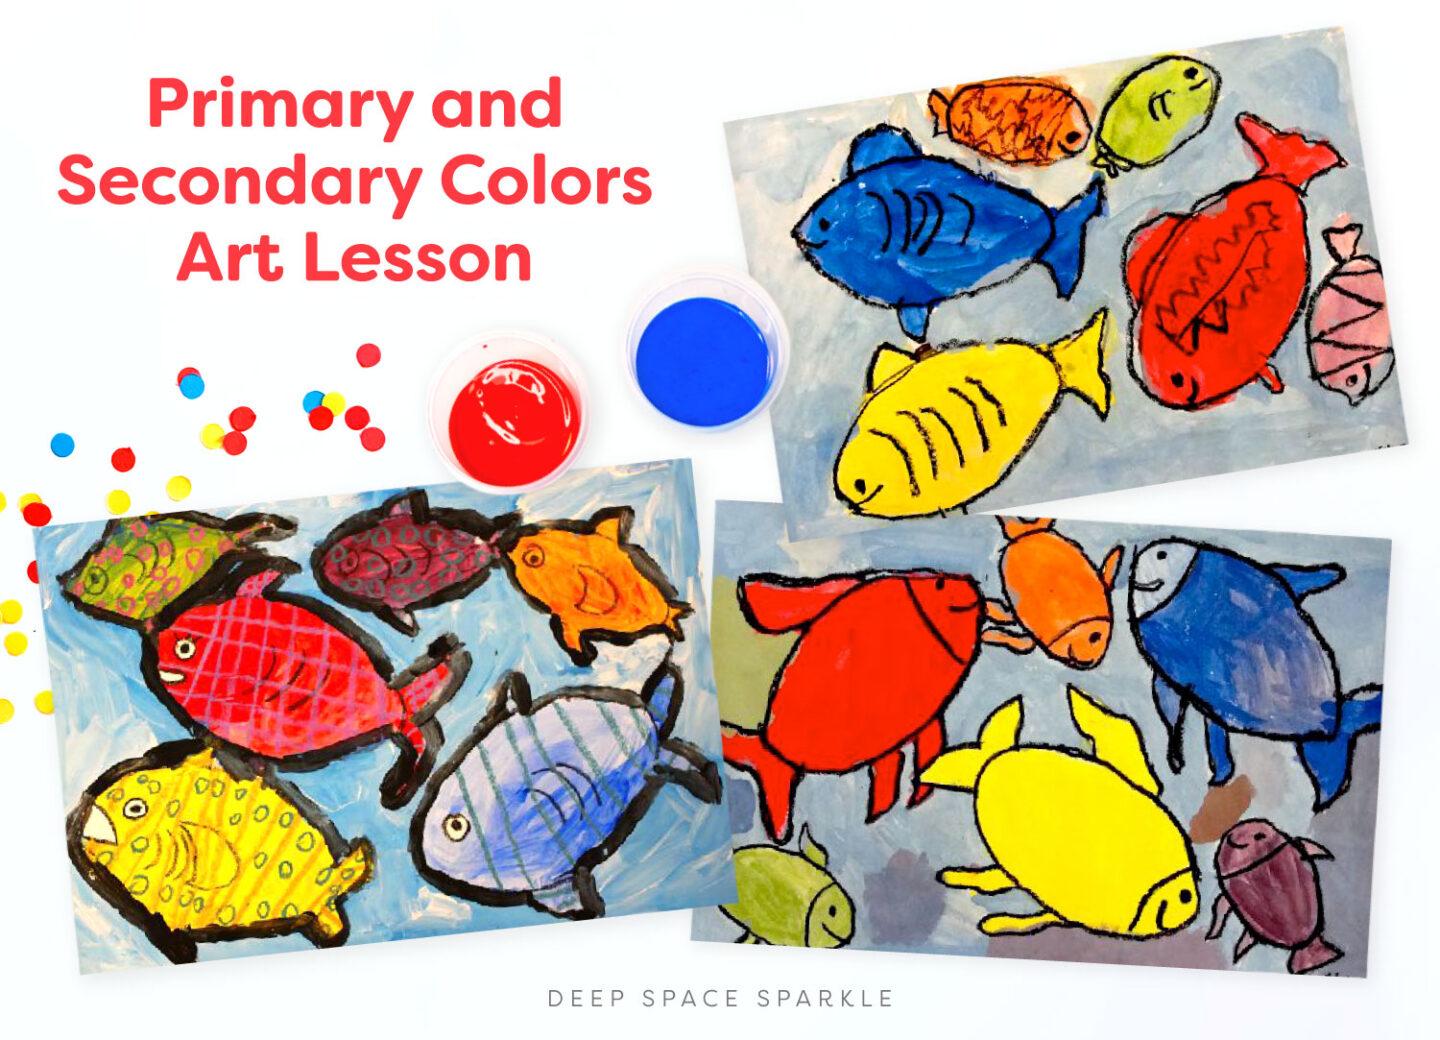 How to Teach Color Theory in the art classroom with primary and secondary colors